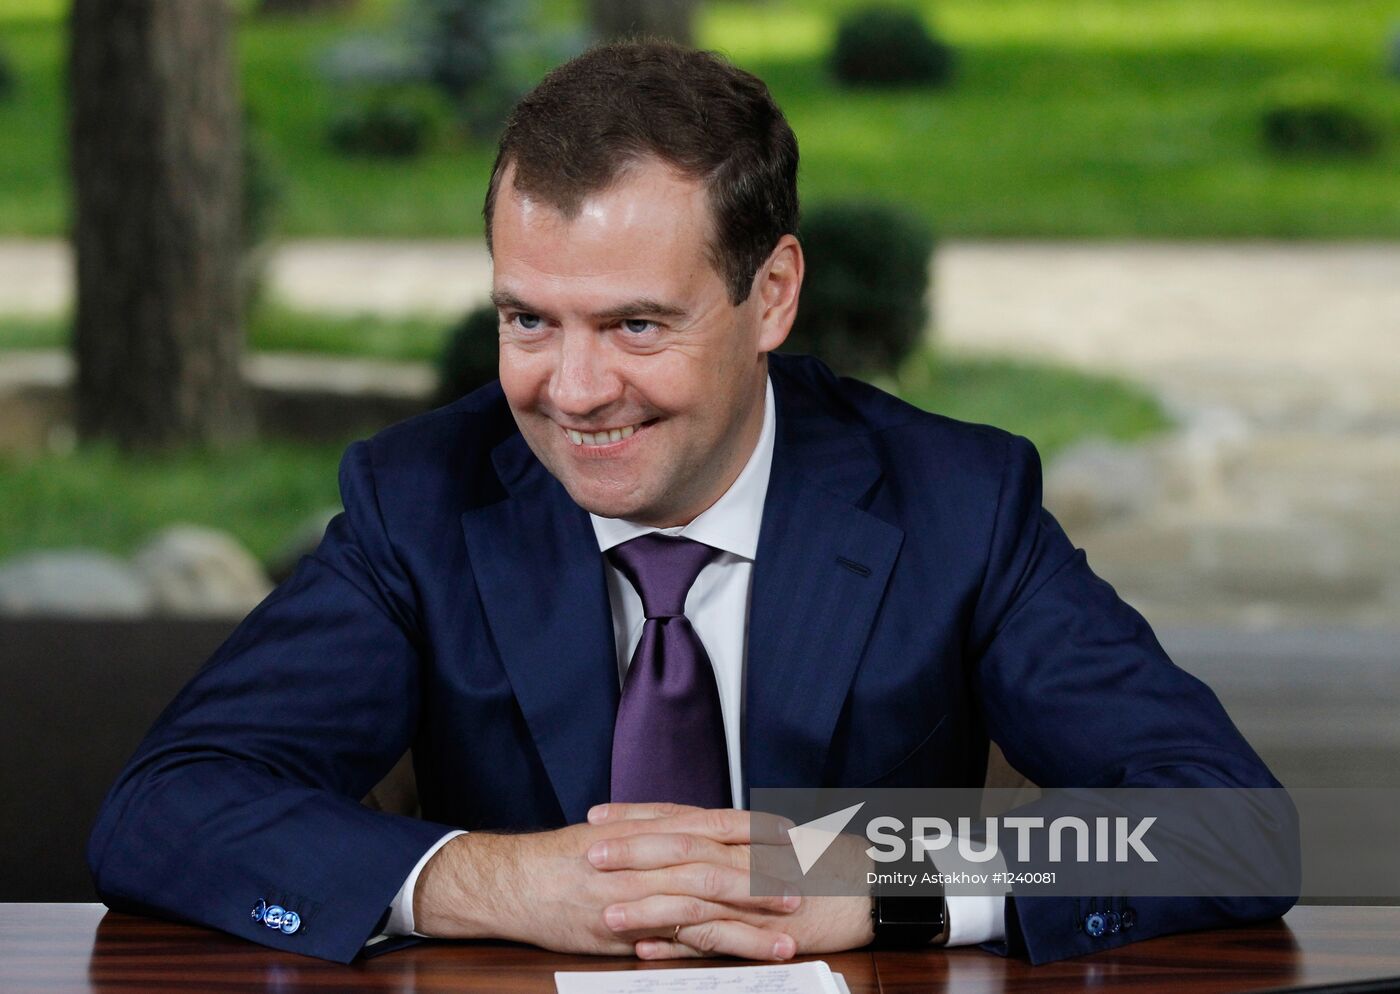 Dmitry Medvedev meets with Federation Council members